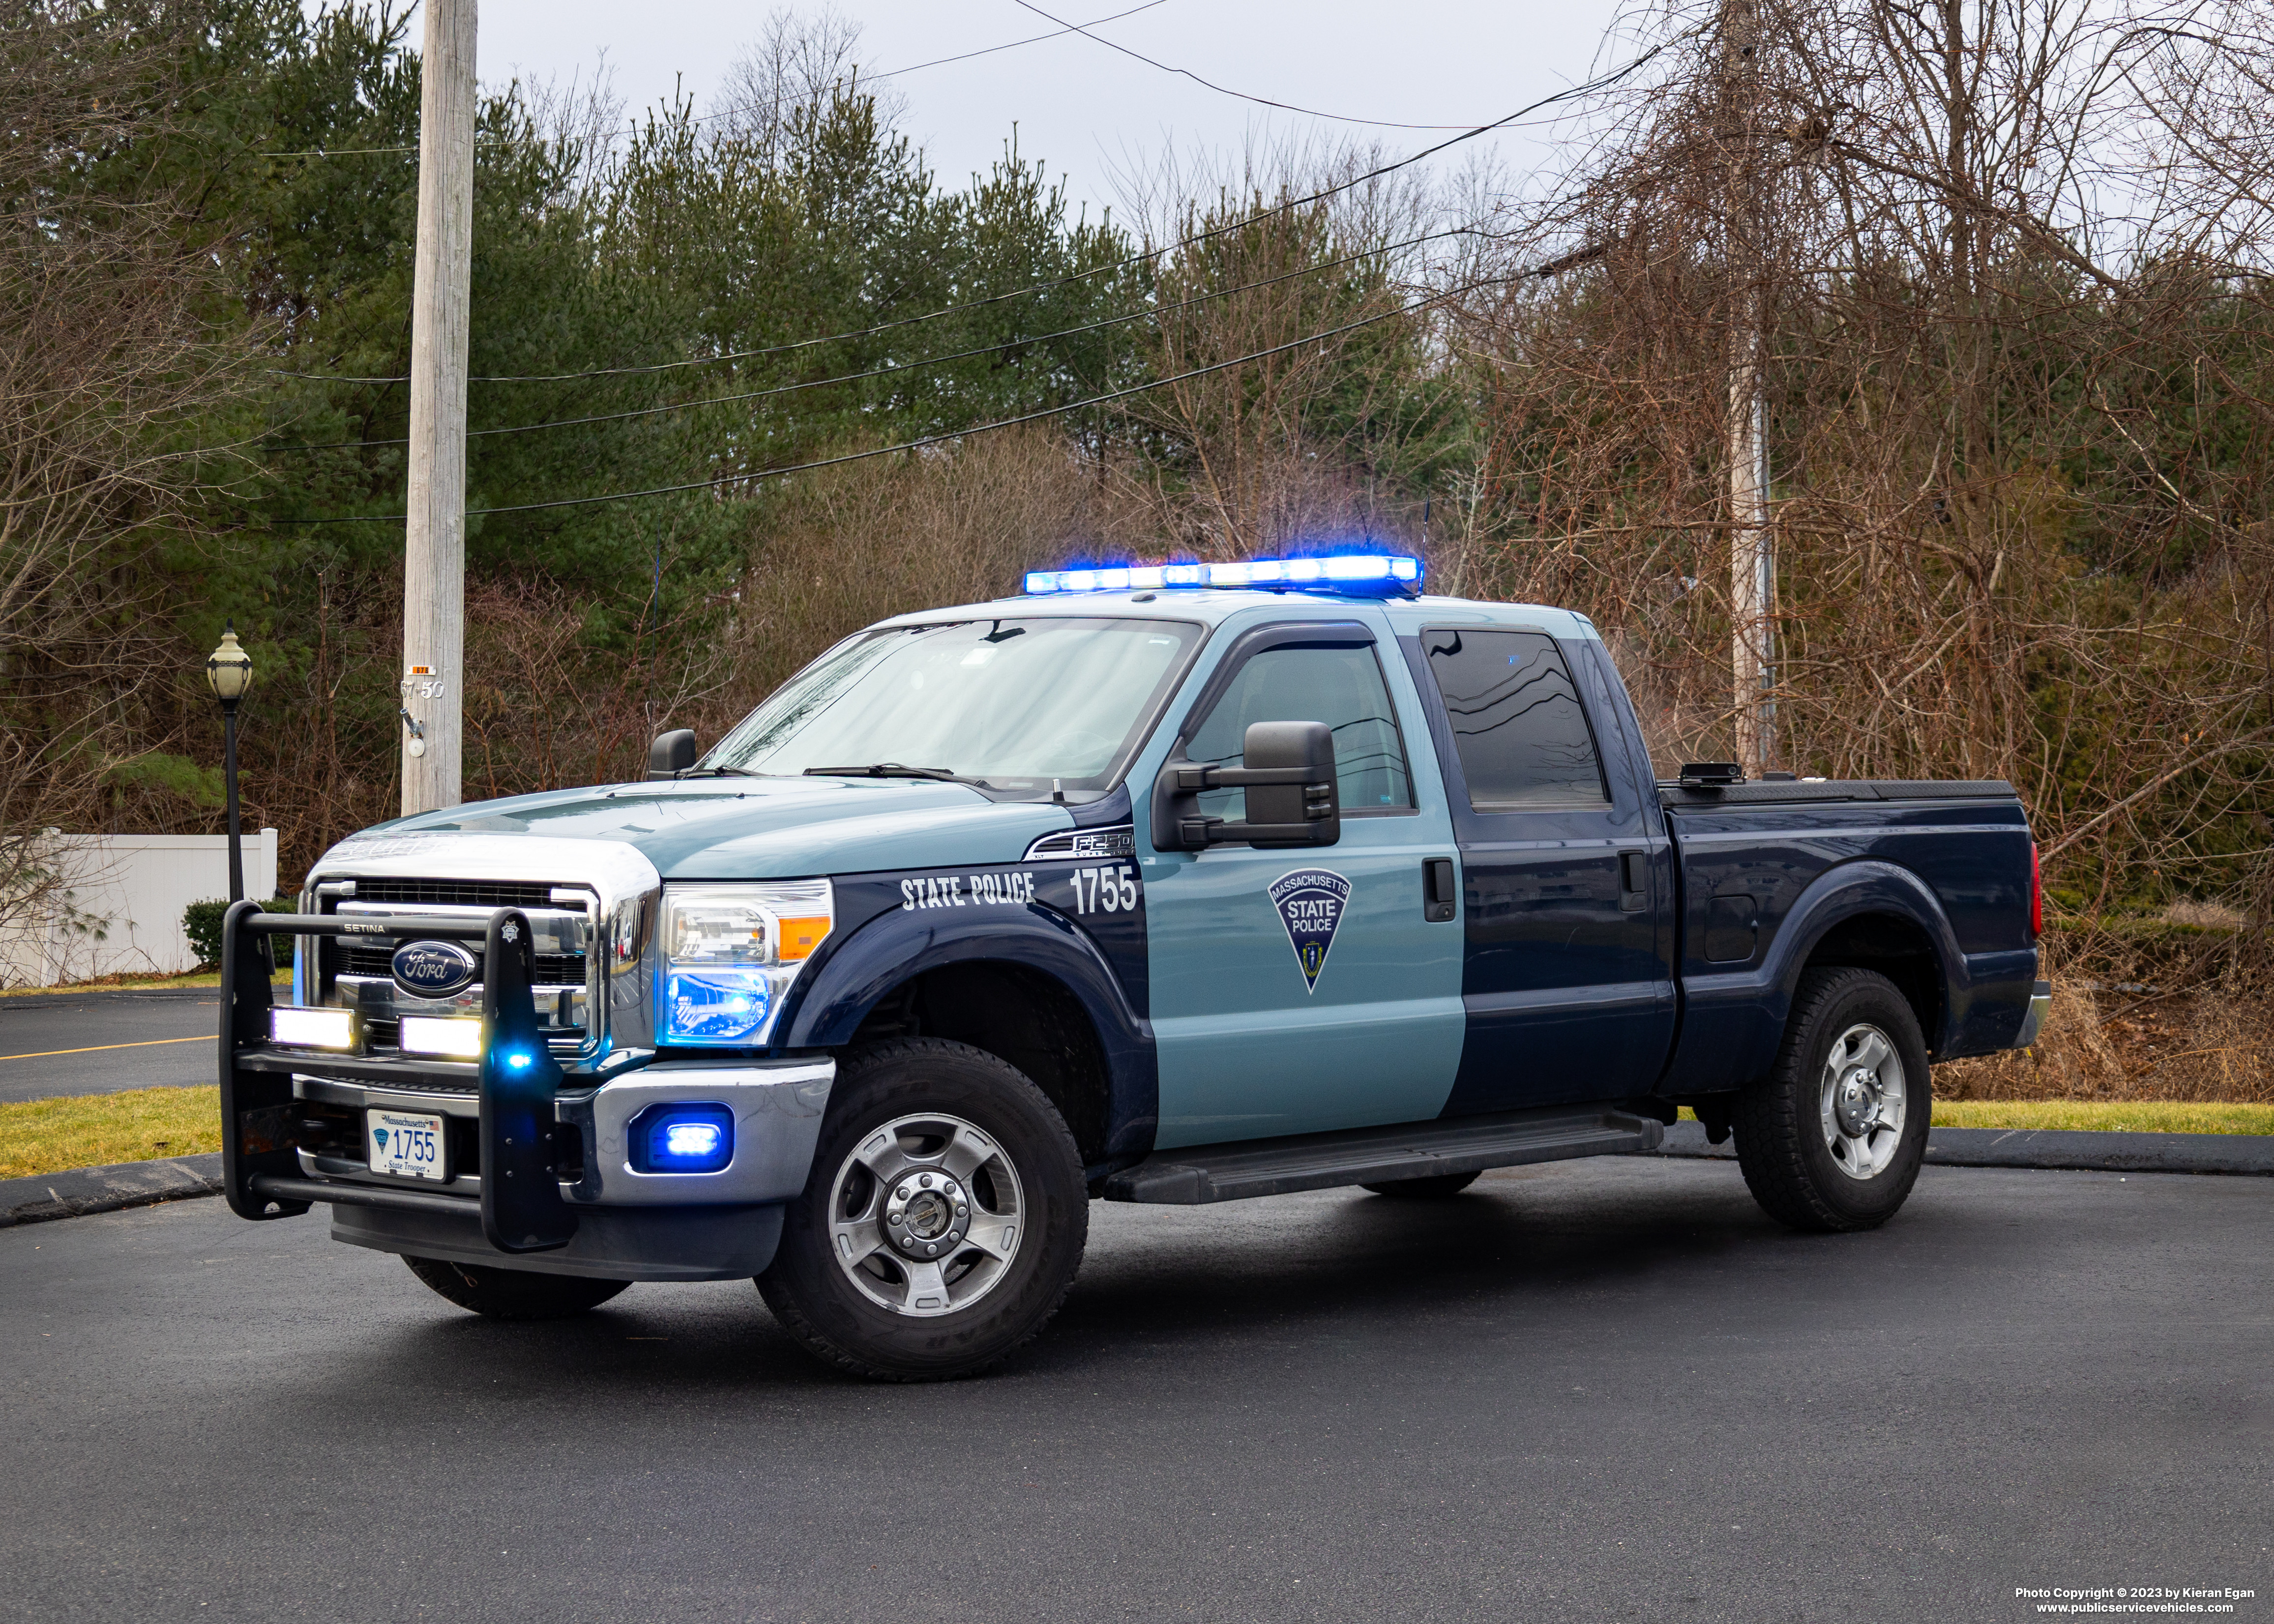 A photo  of Massachusetts State Police
            Cruiser 1755, a 2015 Ford F-250 XLT Crew Cab             taken by Kieran Egan